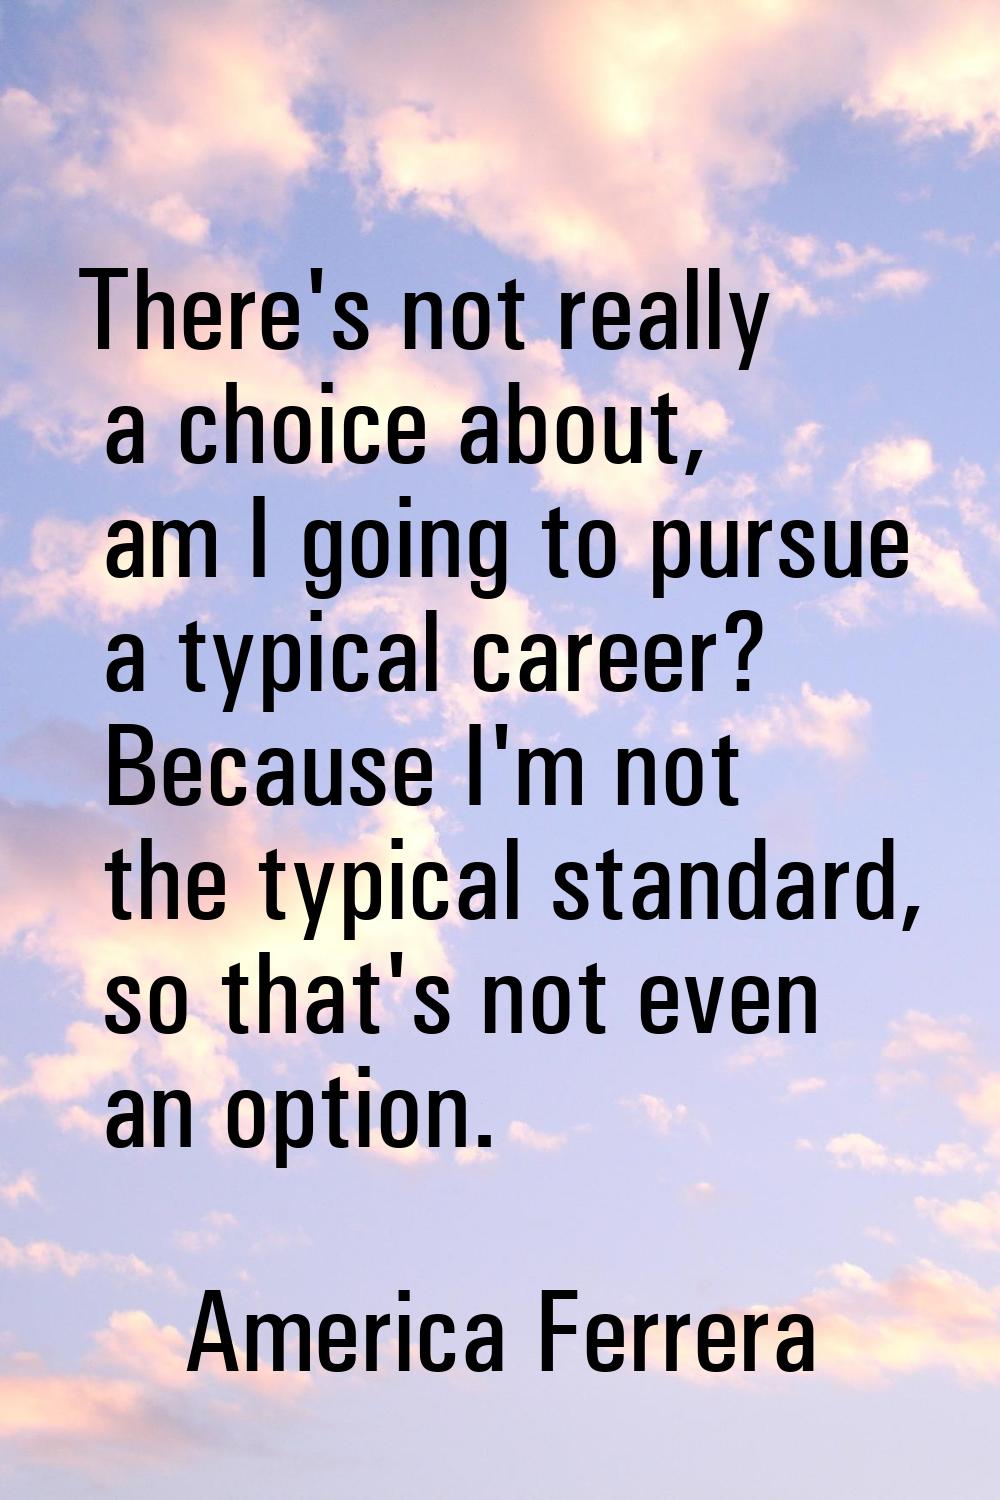 There's not really a choice about, am I going to pursue a typical career? Because I'm not the typic